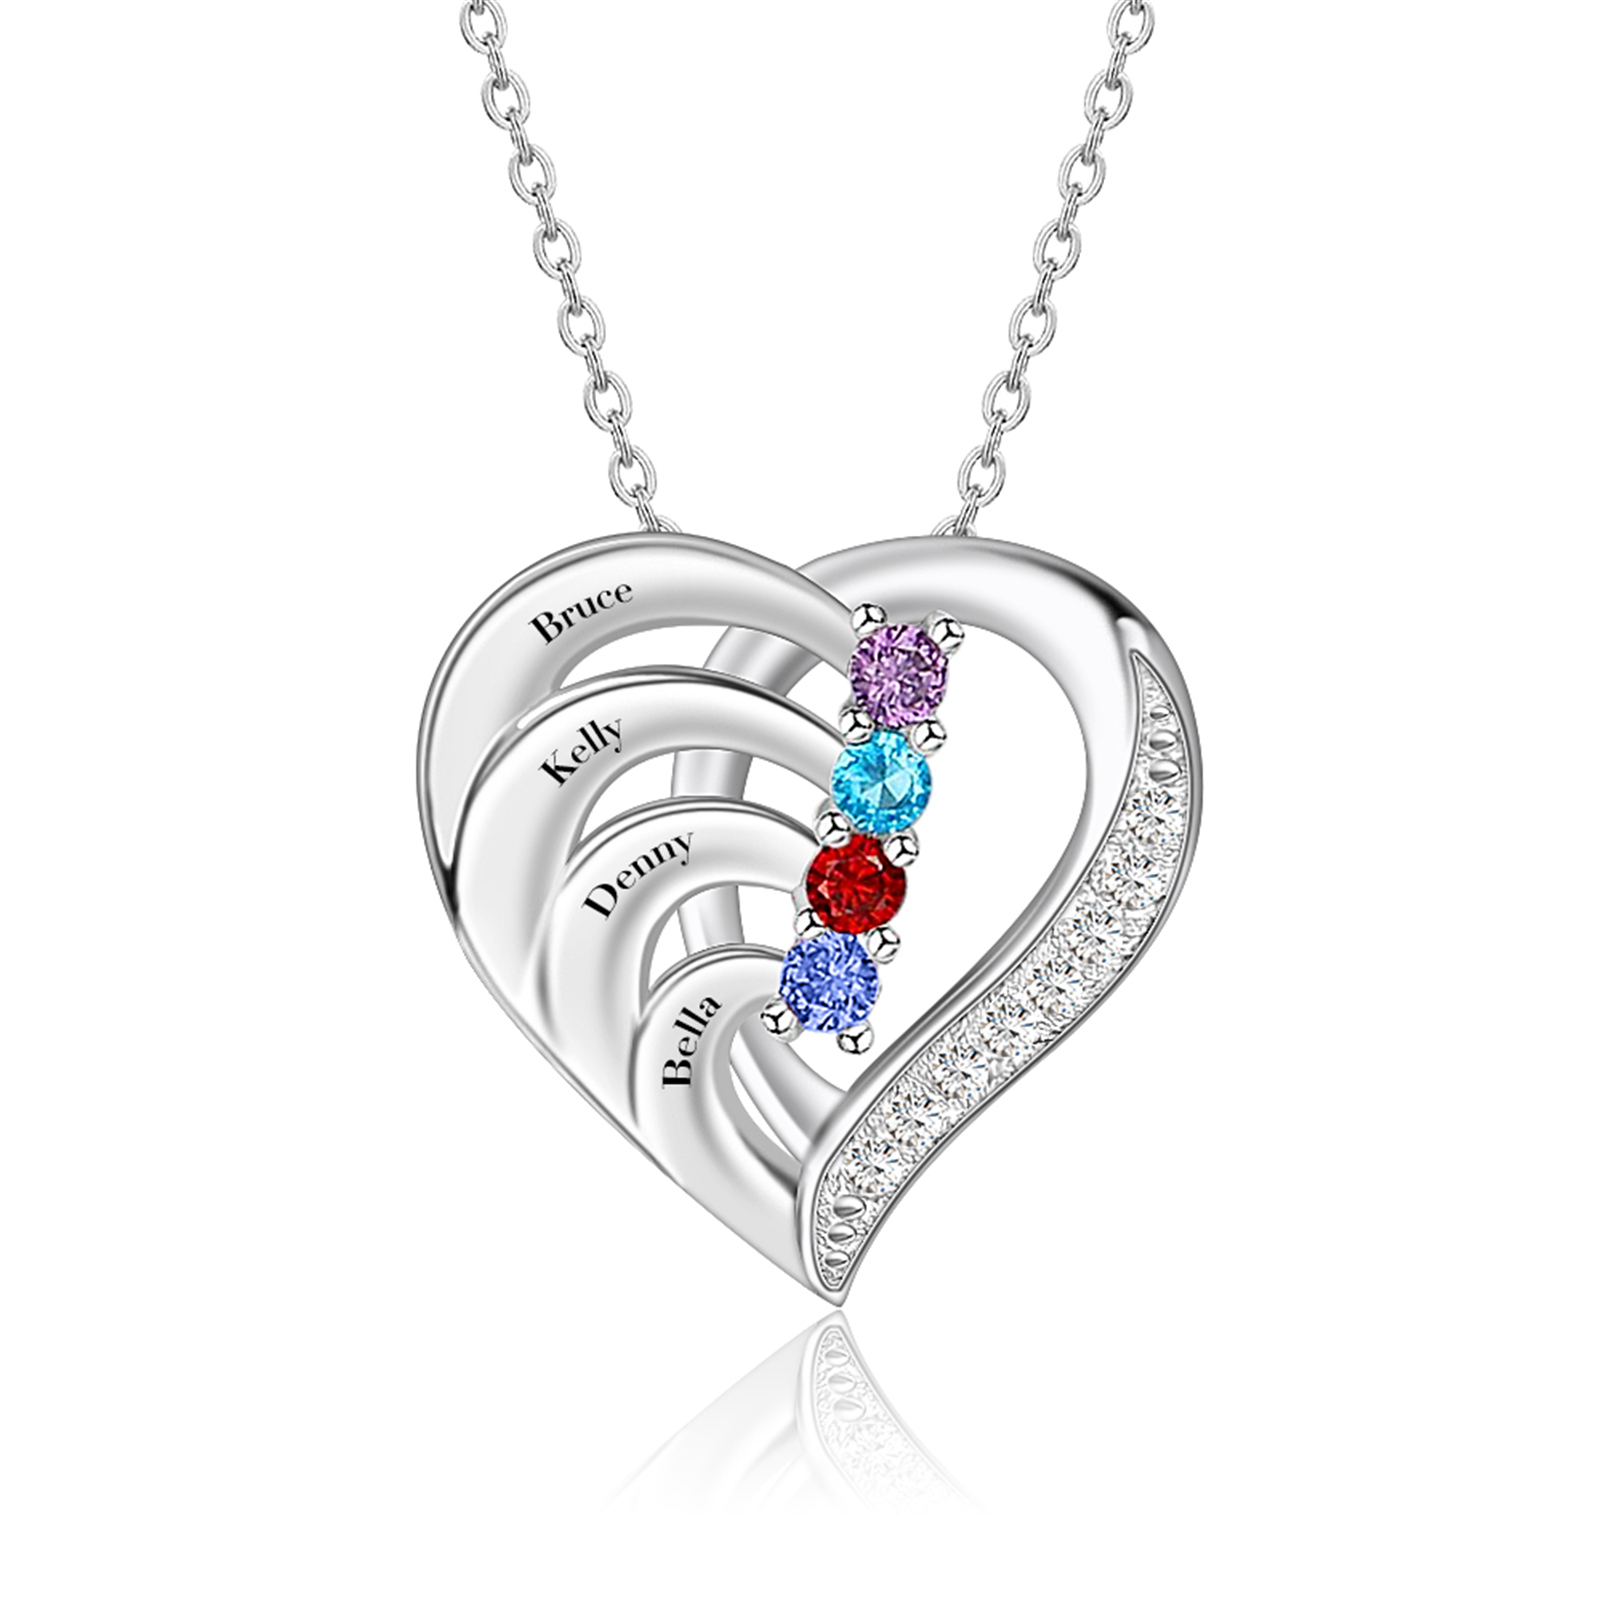 6-4 Love Heart Pendant Necklace Name Necklace with Engraving